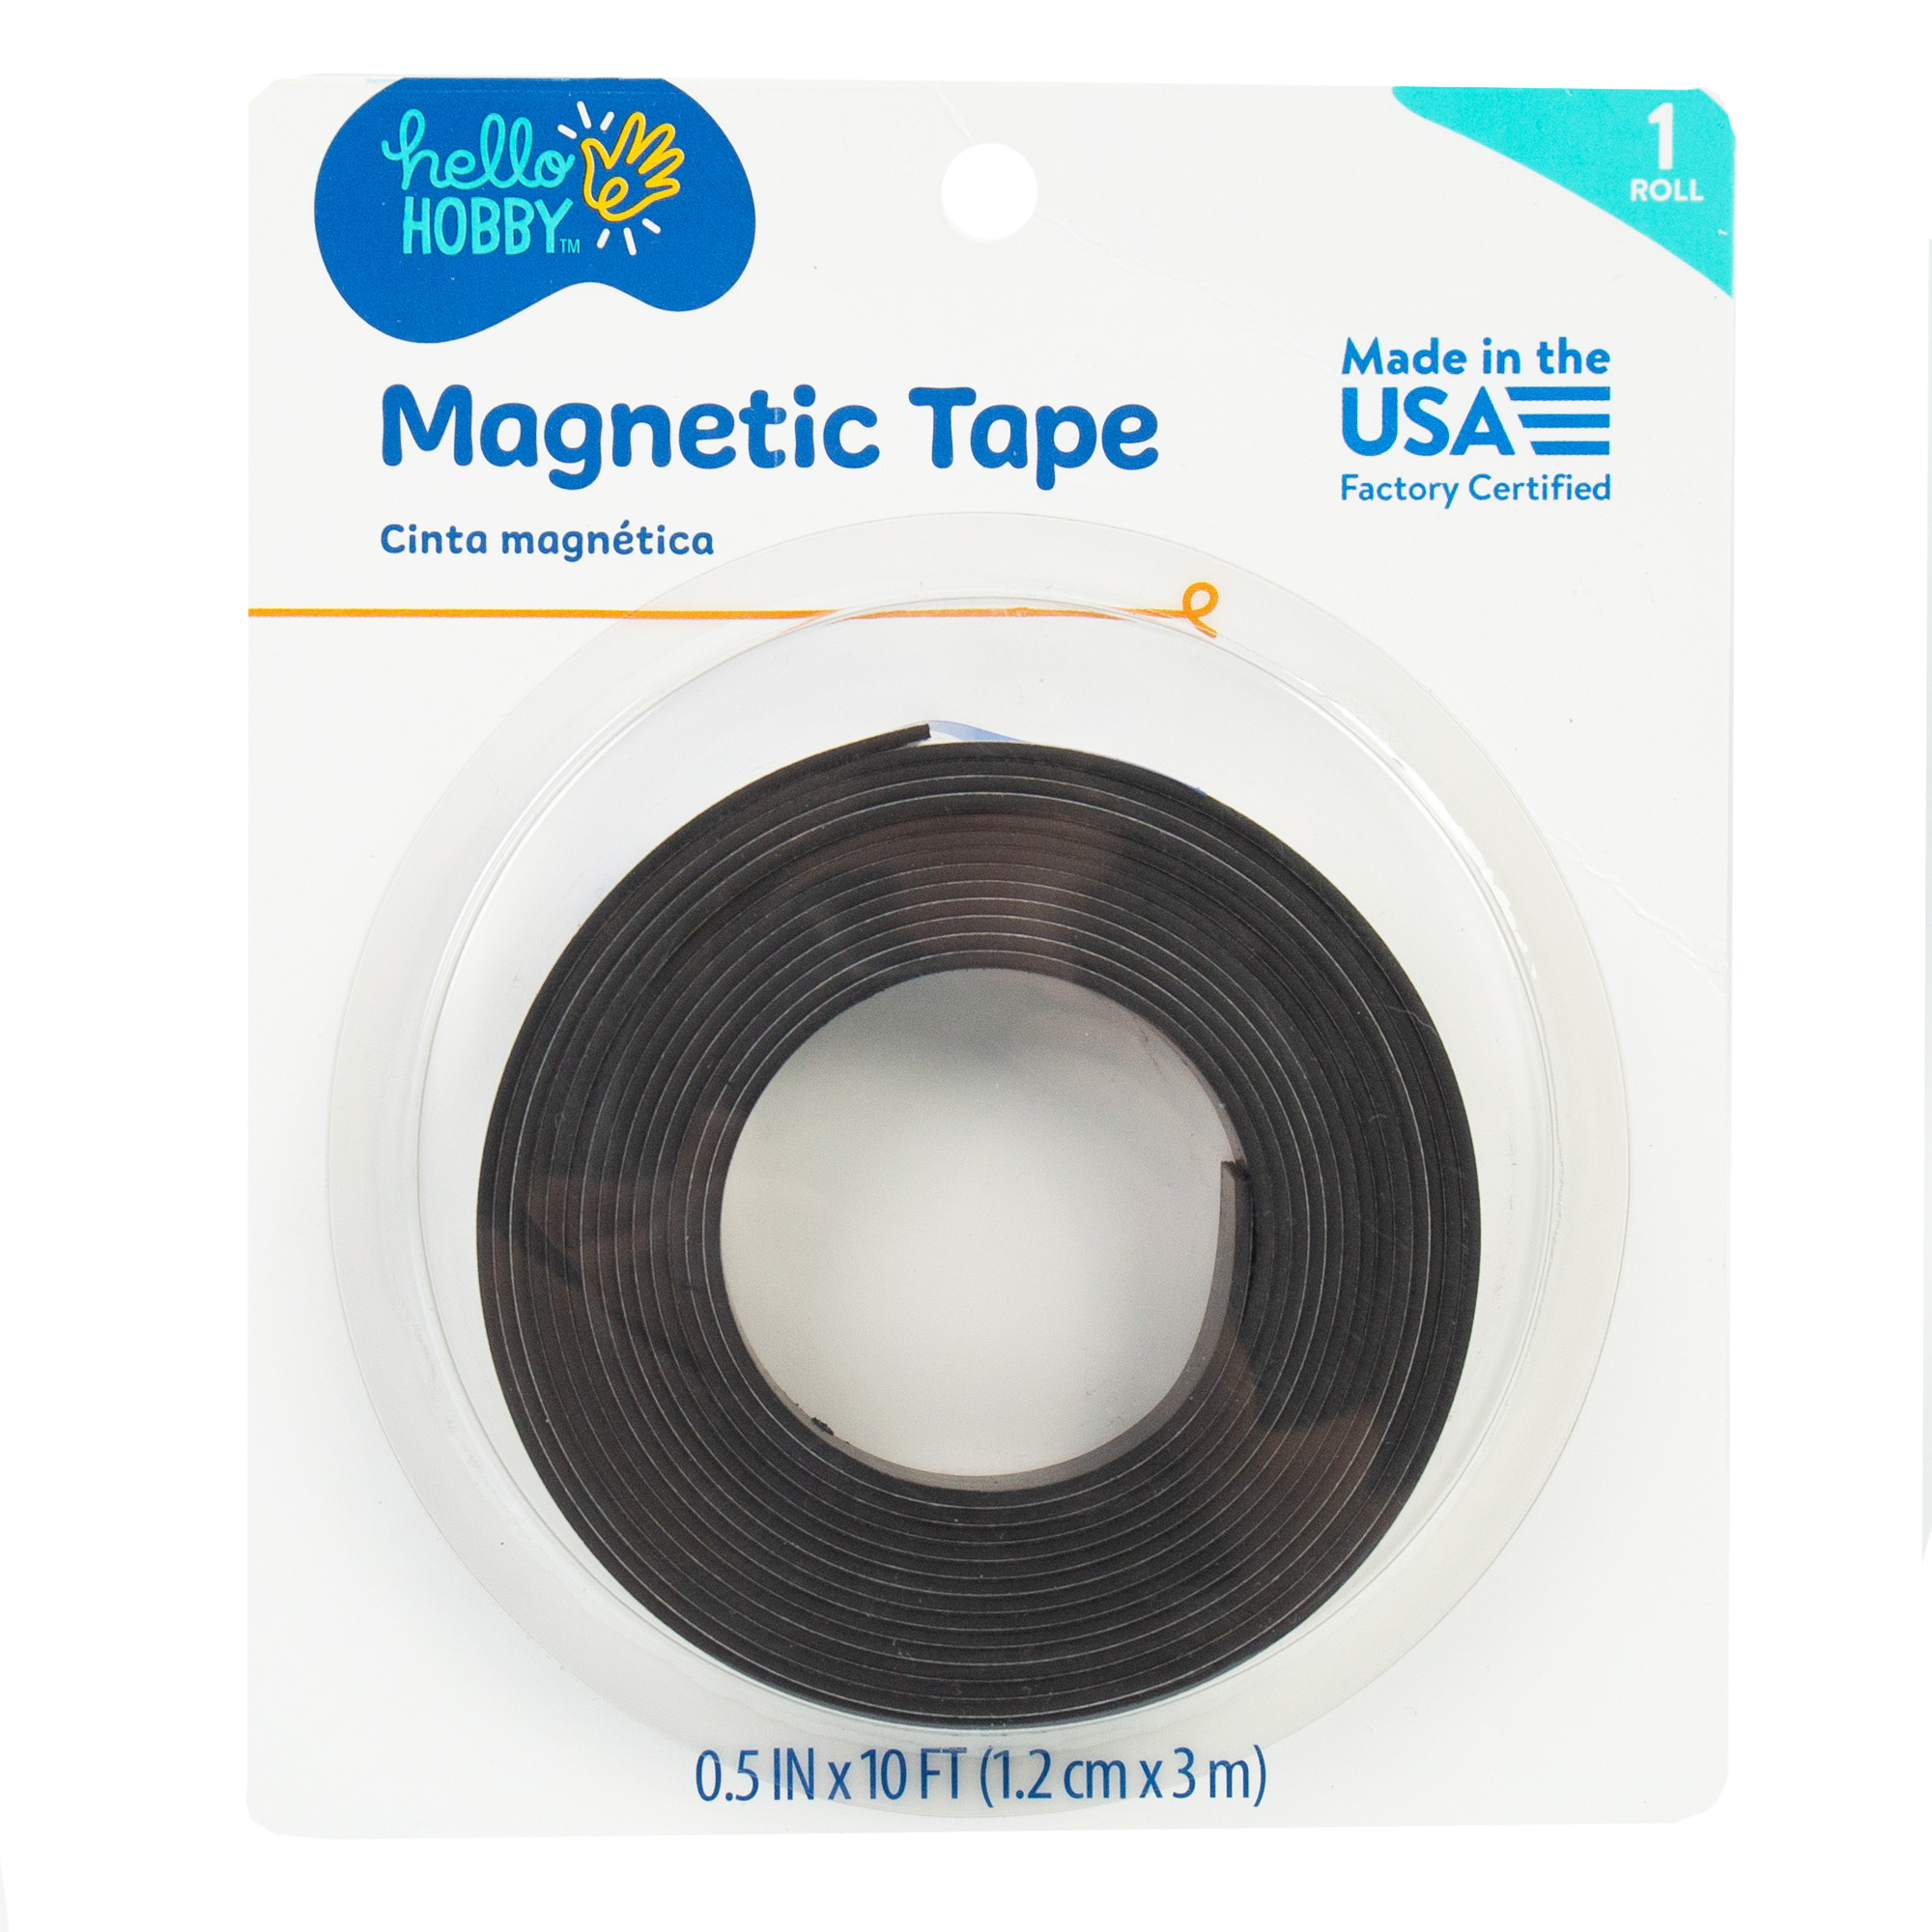 Hello Hobby 0.5-inch Magnetic Tape, 1 Roll, 10 ft.